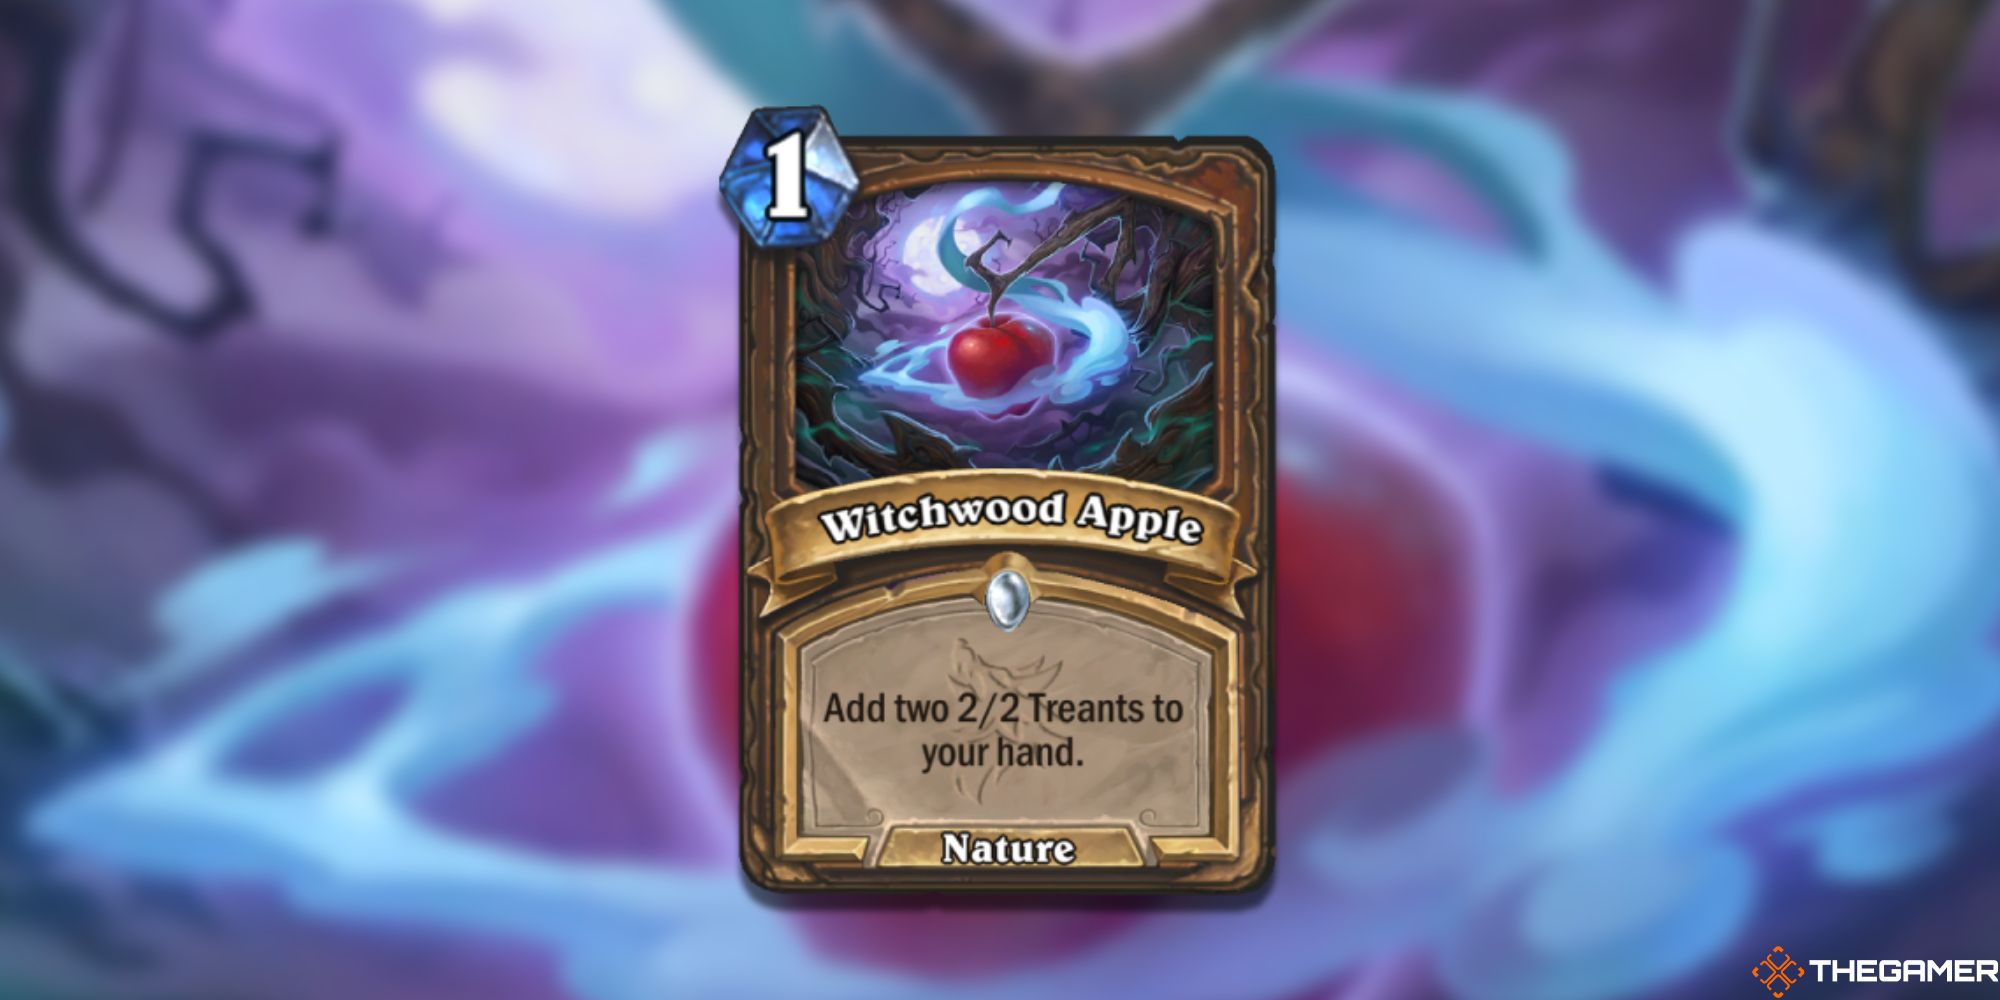 Witchwood Apple Hearthstone Card